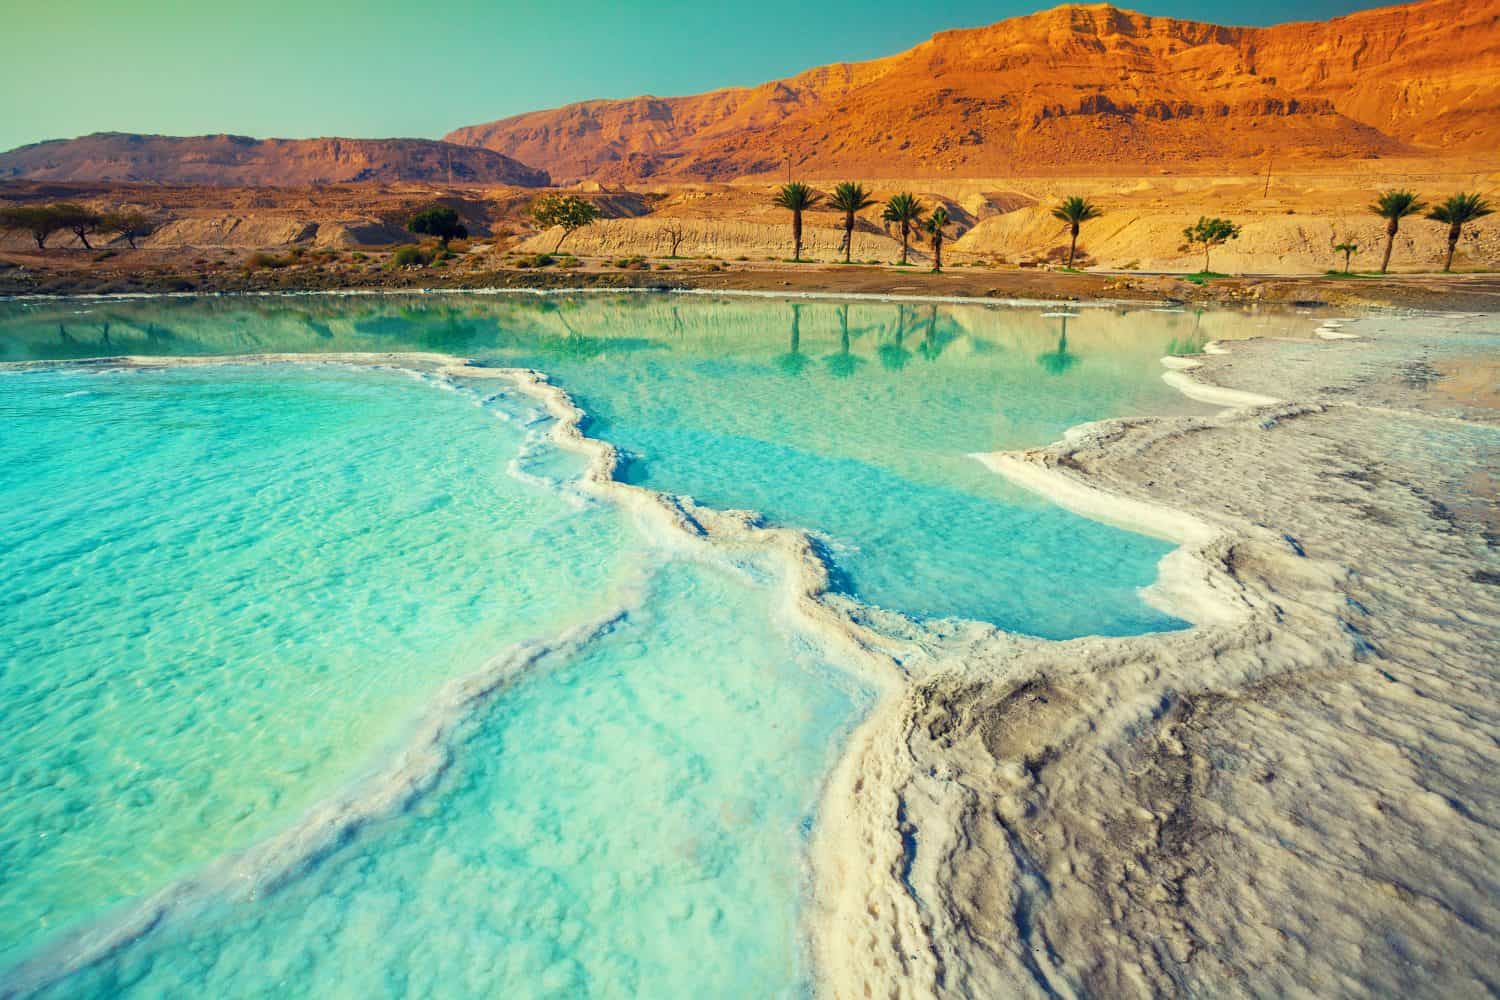 <ul> <li><strong>Location:</strong> Between Israel and Jordan, Southeast Asia</li> <li><strong>Known For:</strong> Being one of the saltiest bodies of water with a high mineral count</li> </ul> <p>One of the travel destinations that may not be around much longer is the Dead Sea, one of the saltiest bodies of water with the highest mineral count. The inbound lake is so salty that tourists practically float when they sit in it. Many factors play a part in the receding of the Dead Sea shoreline. First, man-made problems include gathering the minerals to export them and shifting the freshwater sources away from the Dead Sea for use. These reasons, which include global warming, contribute to the lake drying up. Additionally, water levels drop around <a href="https://eros.usgs.gov/earthshots/rates-of-decline">3 to 4 feet every year</a>, and the receding shoreline has caused dangerous sinkholes, one of which swallowed a parking lot. While the Dead Sea may not completely disappear, if something isn't done to preserve it, it may become more challenging for tourists to experience its wonder and history.</p>